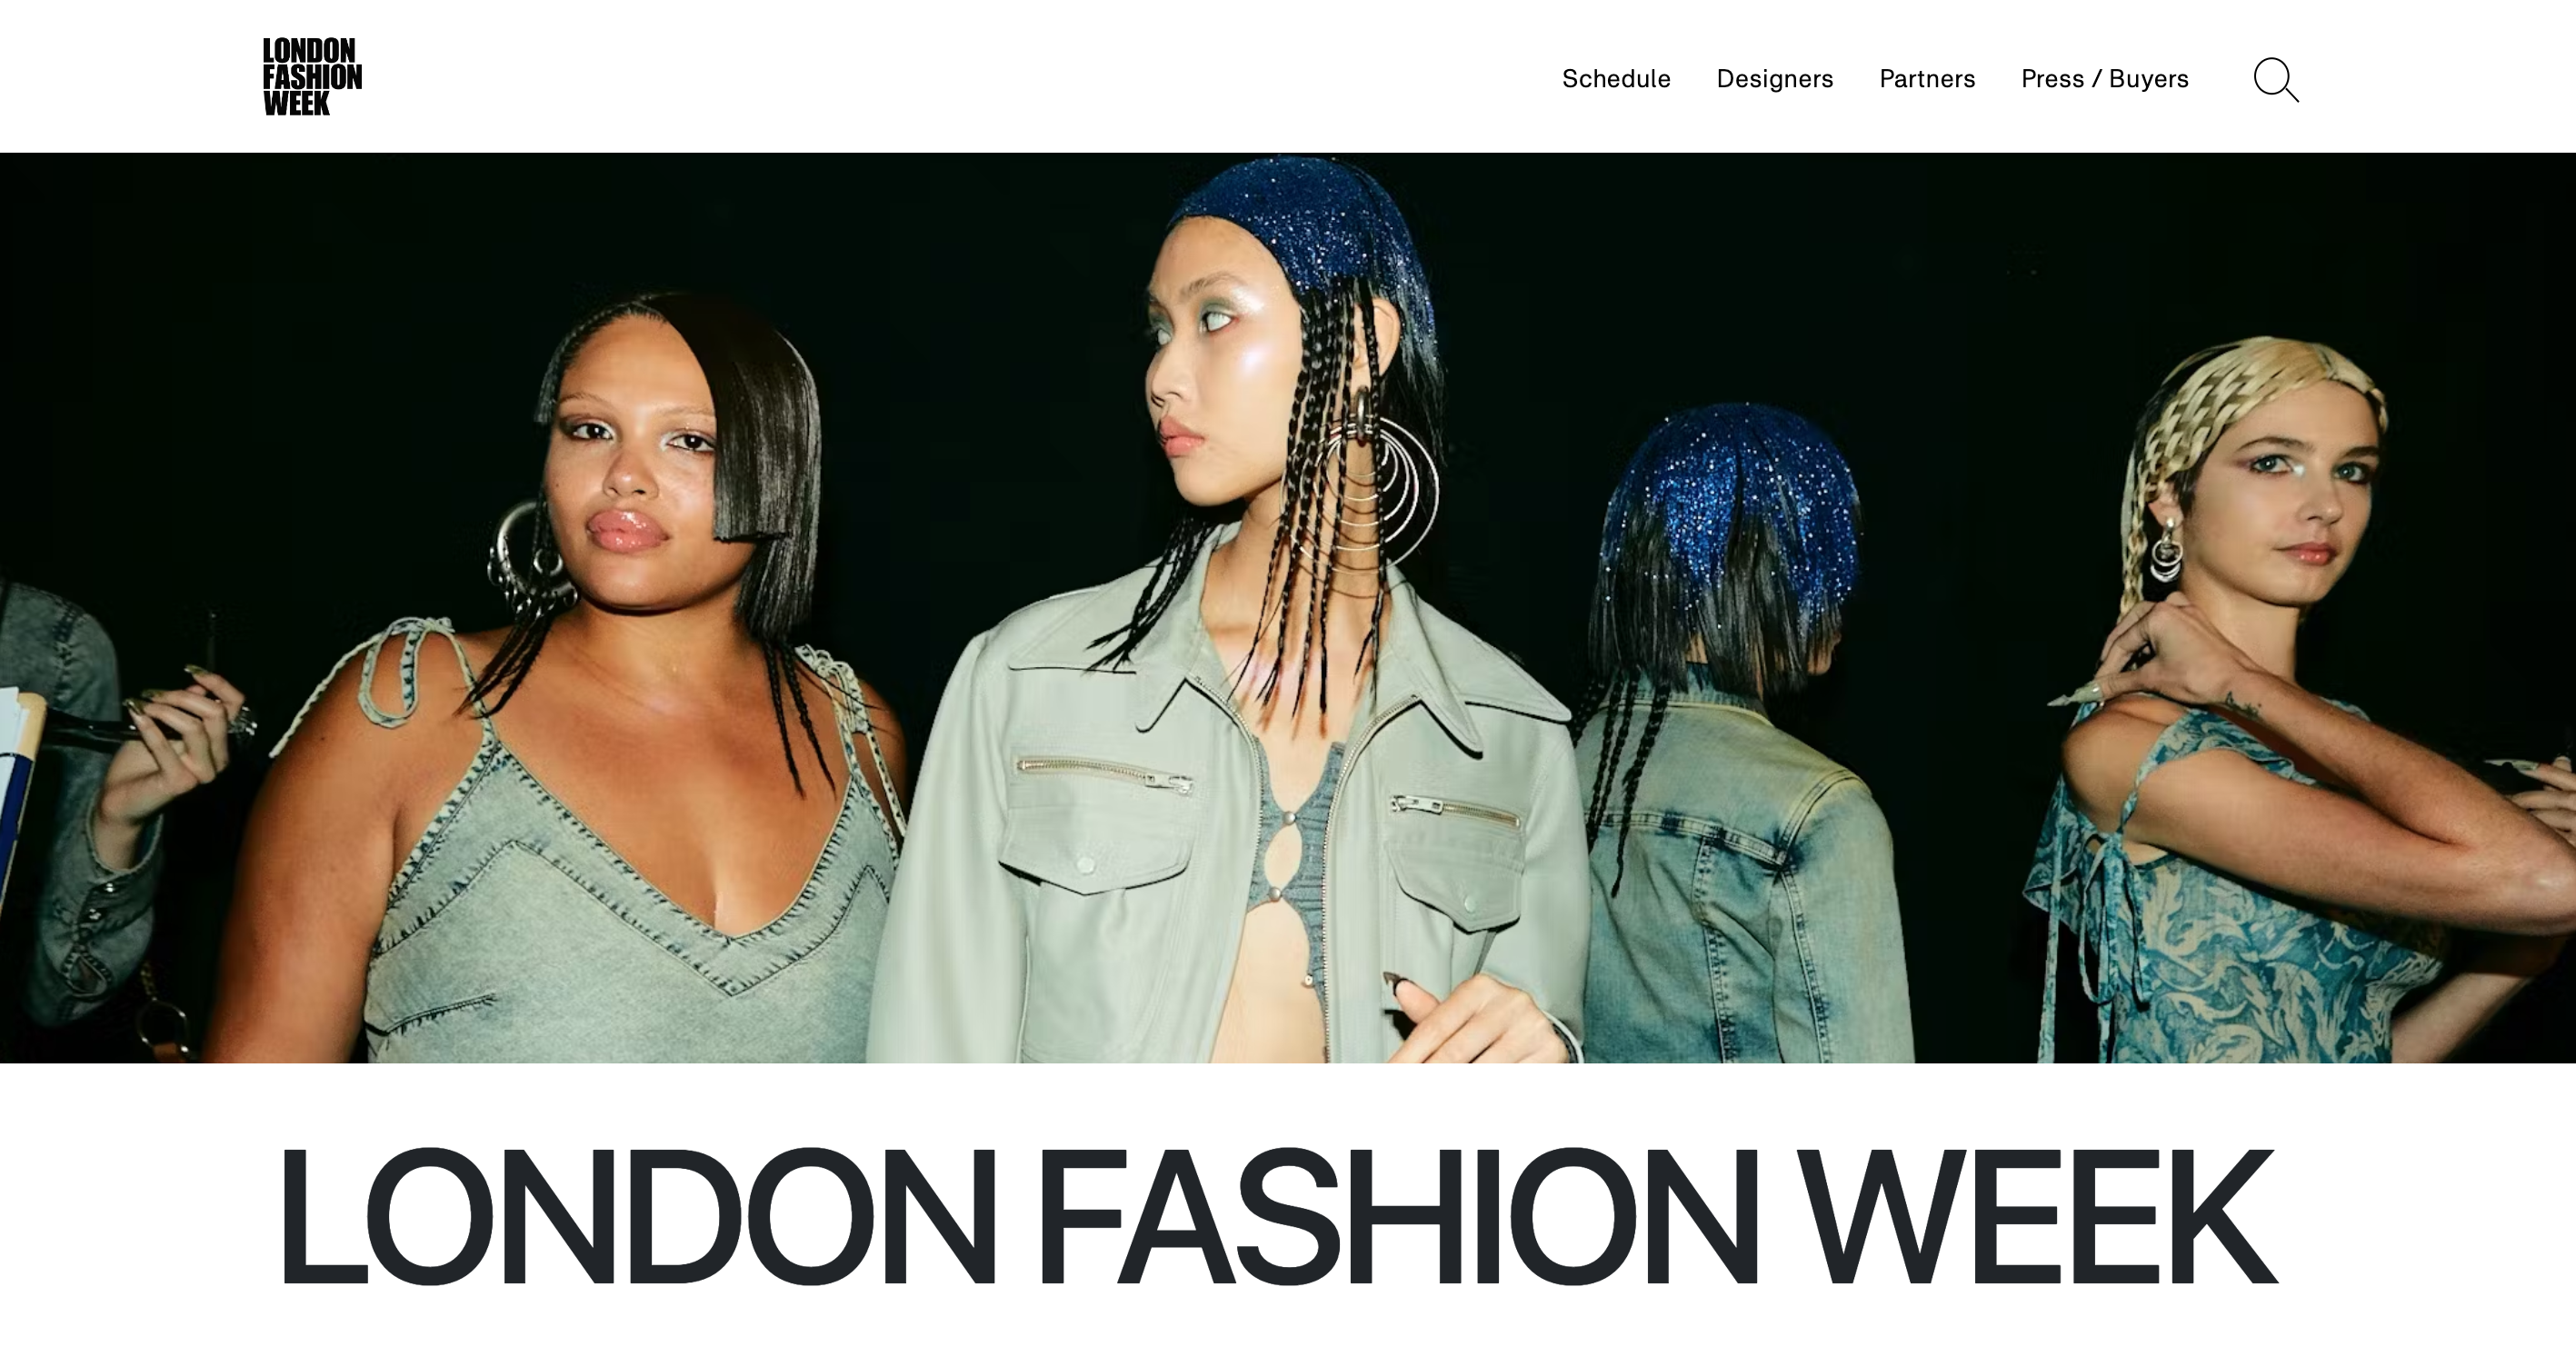 Official Schedule of September London Fashion Week Released, Featuring 21 Chinese Designer Brands